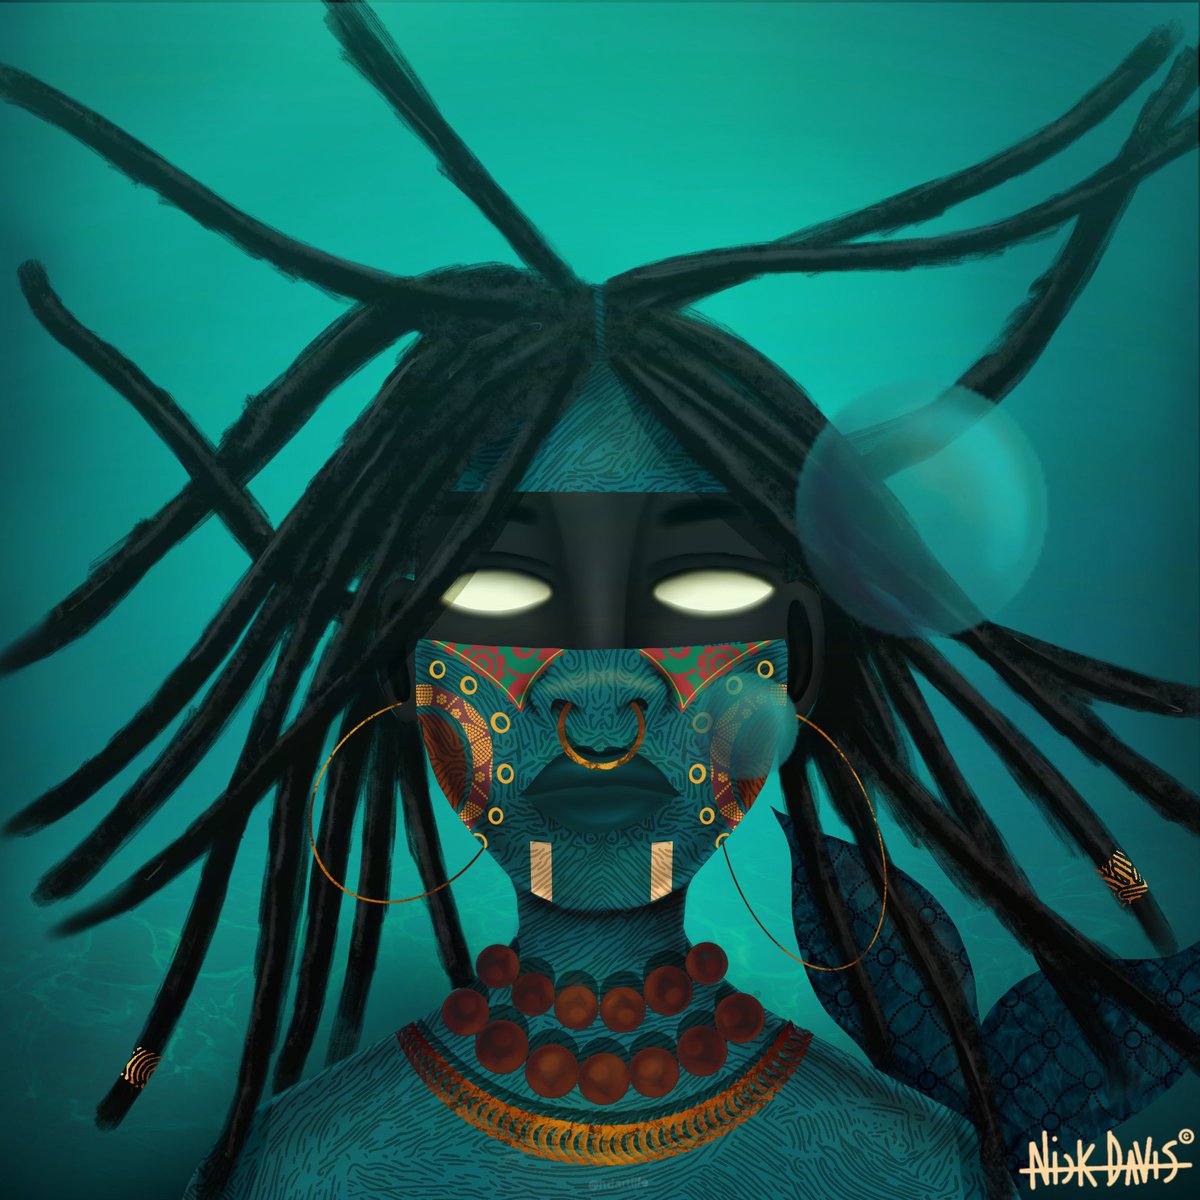 “Underwater Blues” by Nick Davis “To me, we are the most beautiful creatures in the whole world. Black people. And I mean that in every sense.” - Nina Simone @NinaSimoneMusic #BlackIsBeautiful